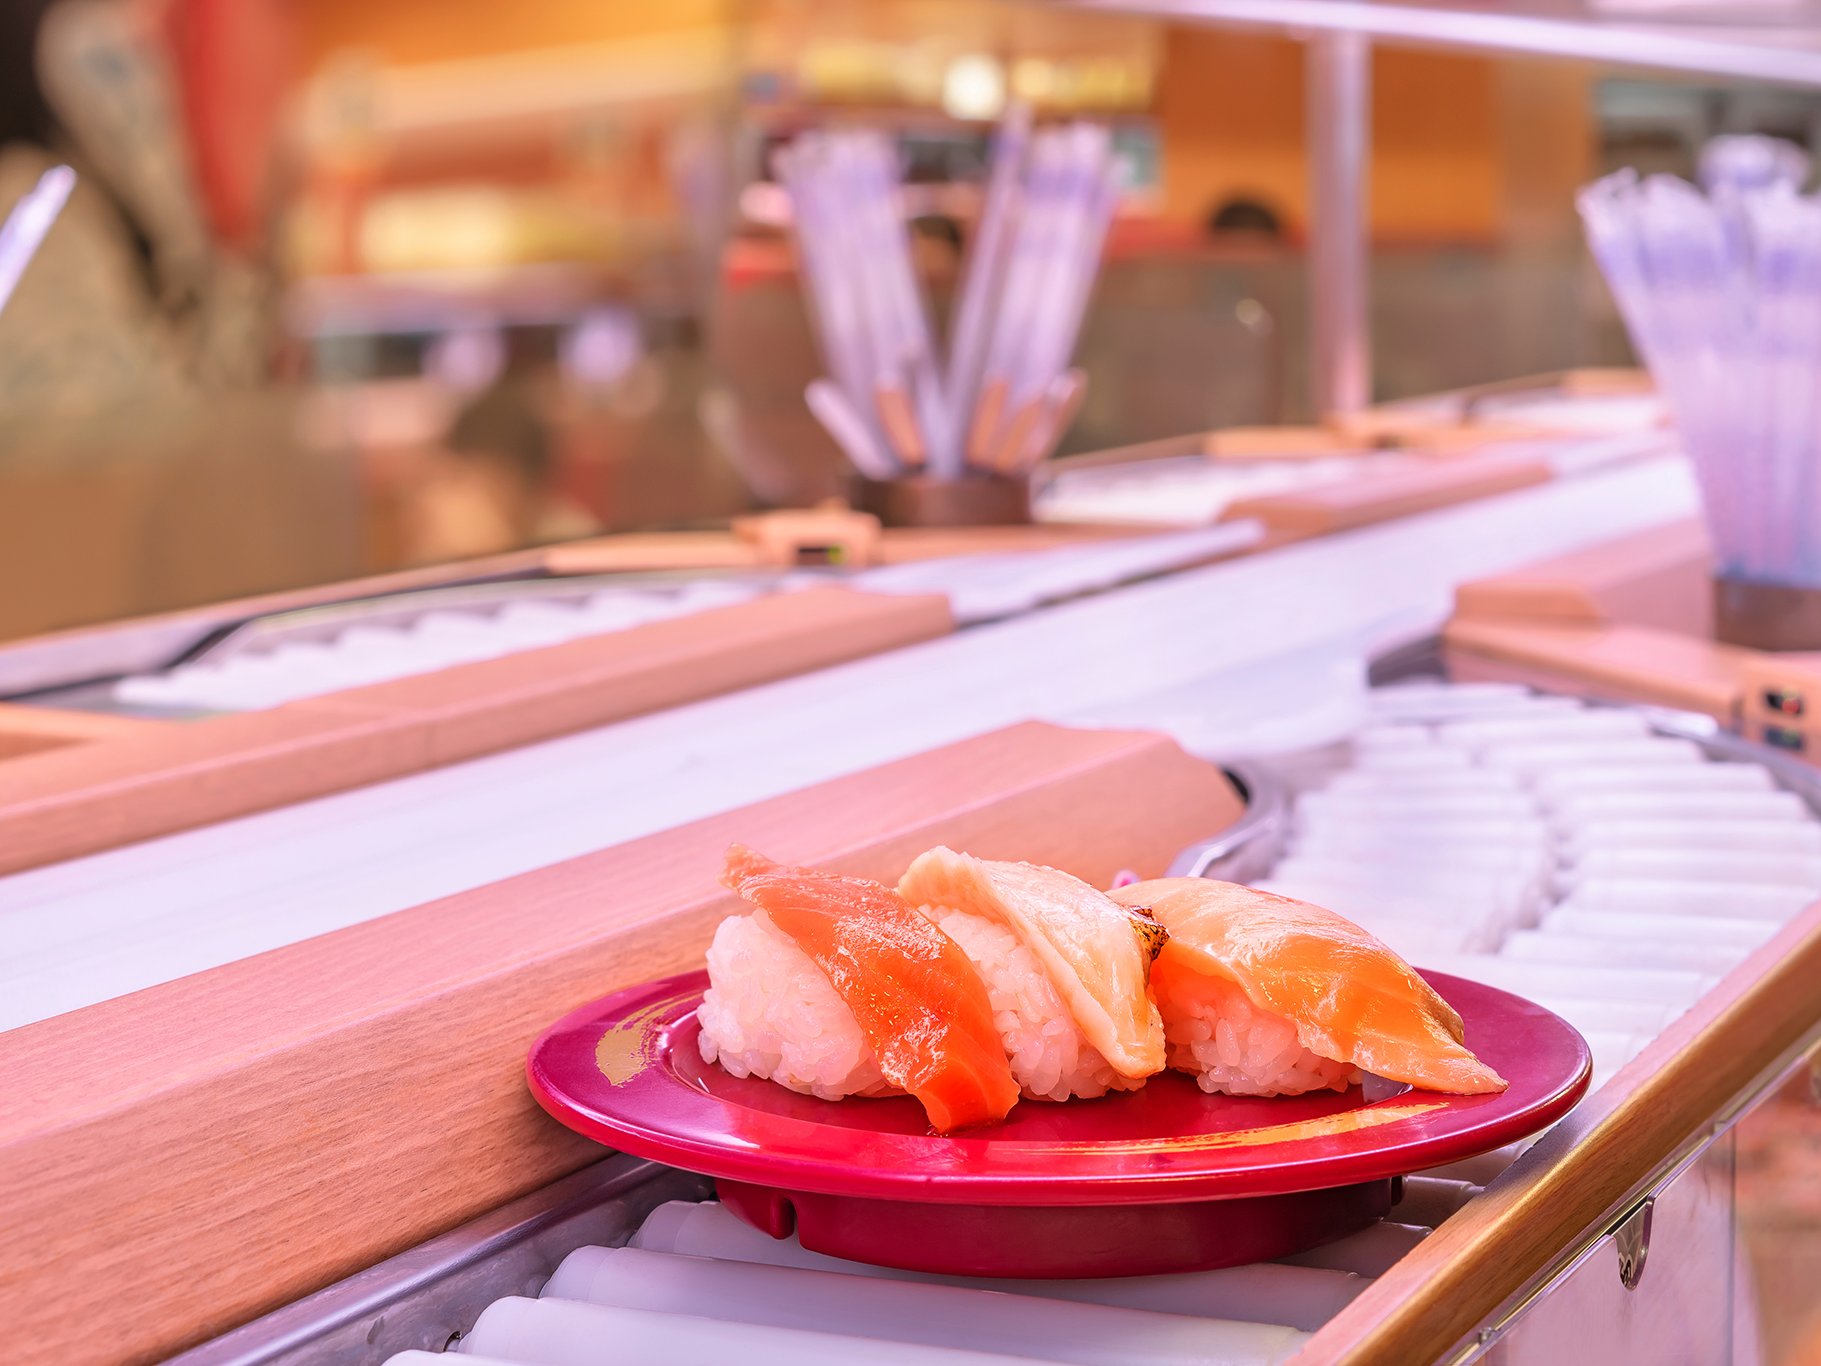 Do sushi restaurants need to install security cameras?